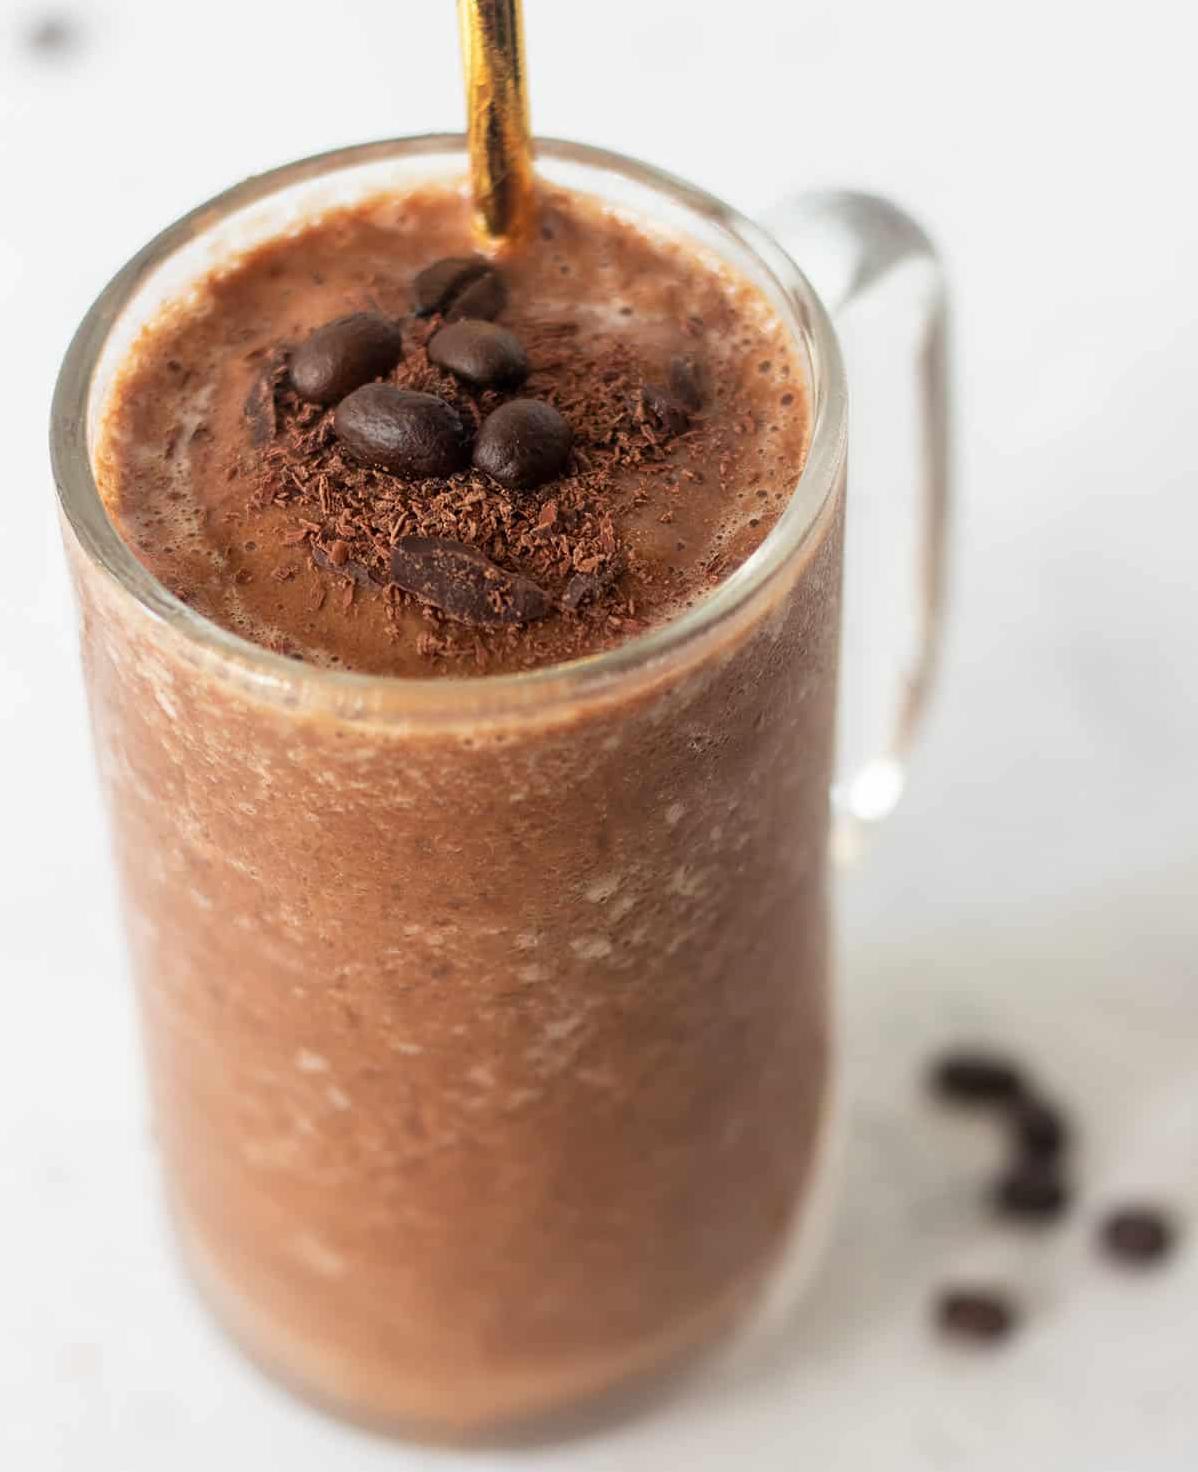  Chocolate lovers rejoice! This vegan mocha smoothie is a chocolatey delight with a hint of coffee